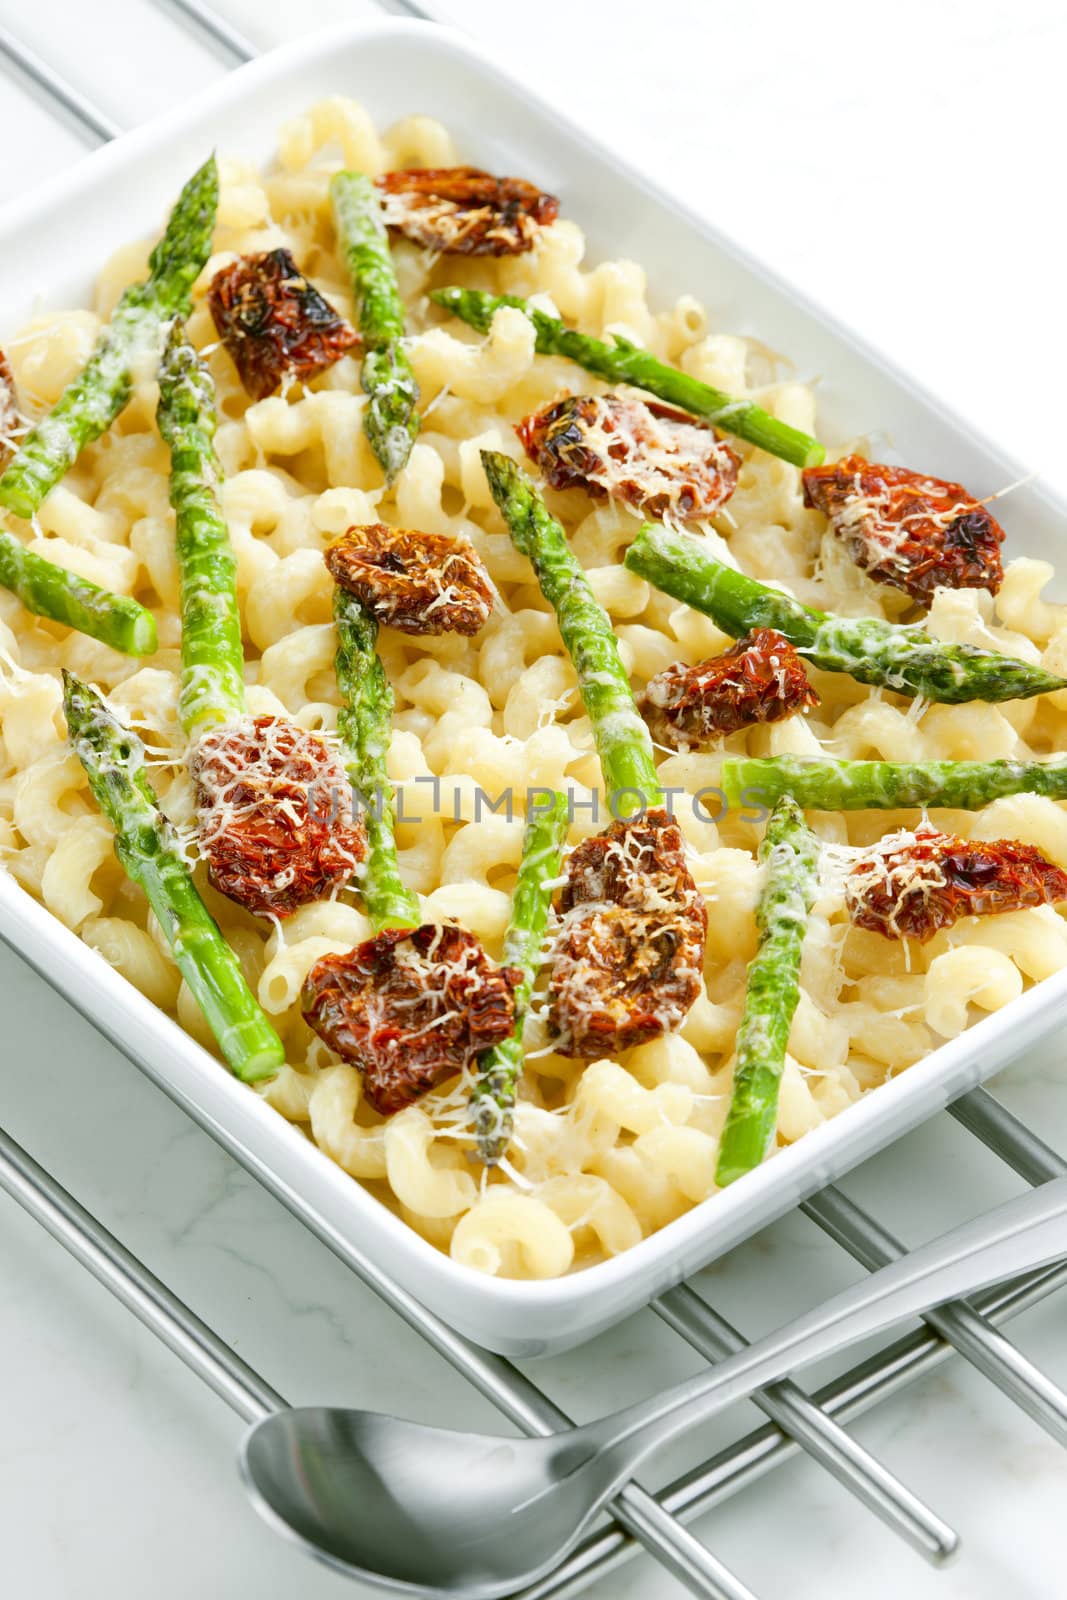 pasta baked with dried tomatoes, asparagus and pecorino cheese by phbcz